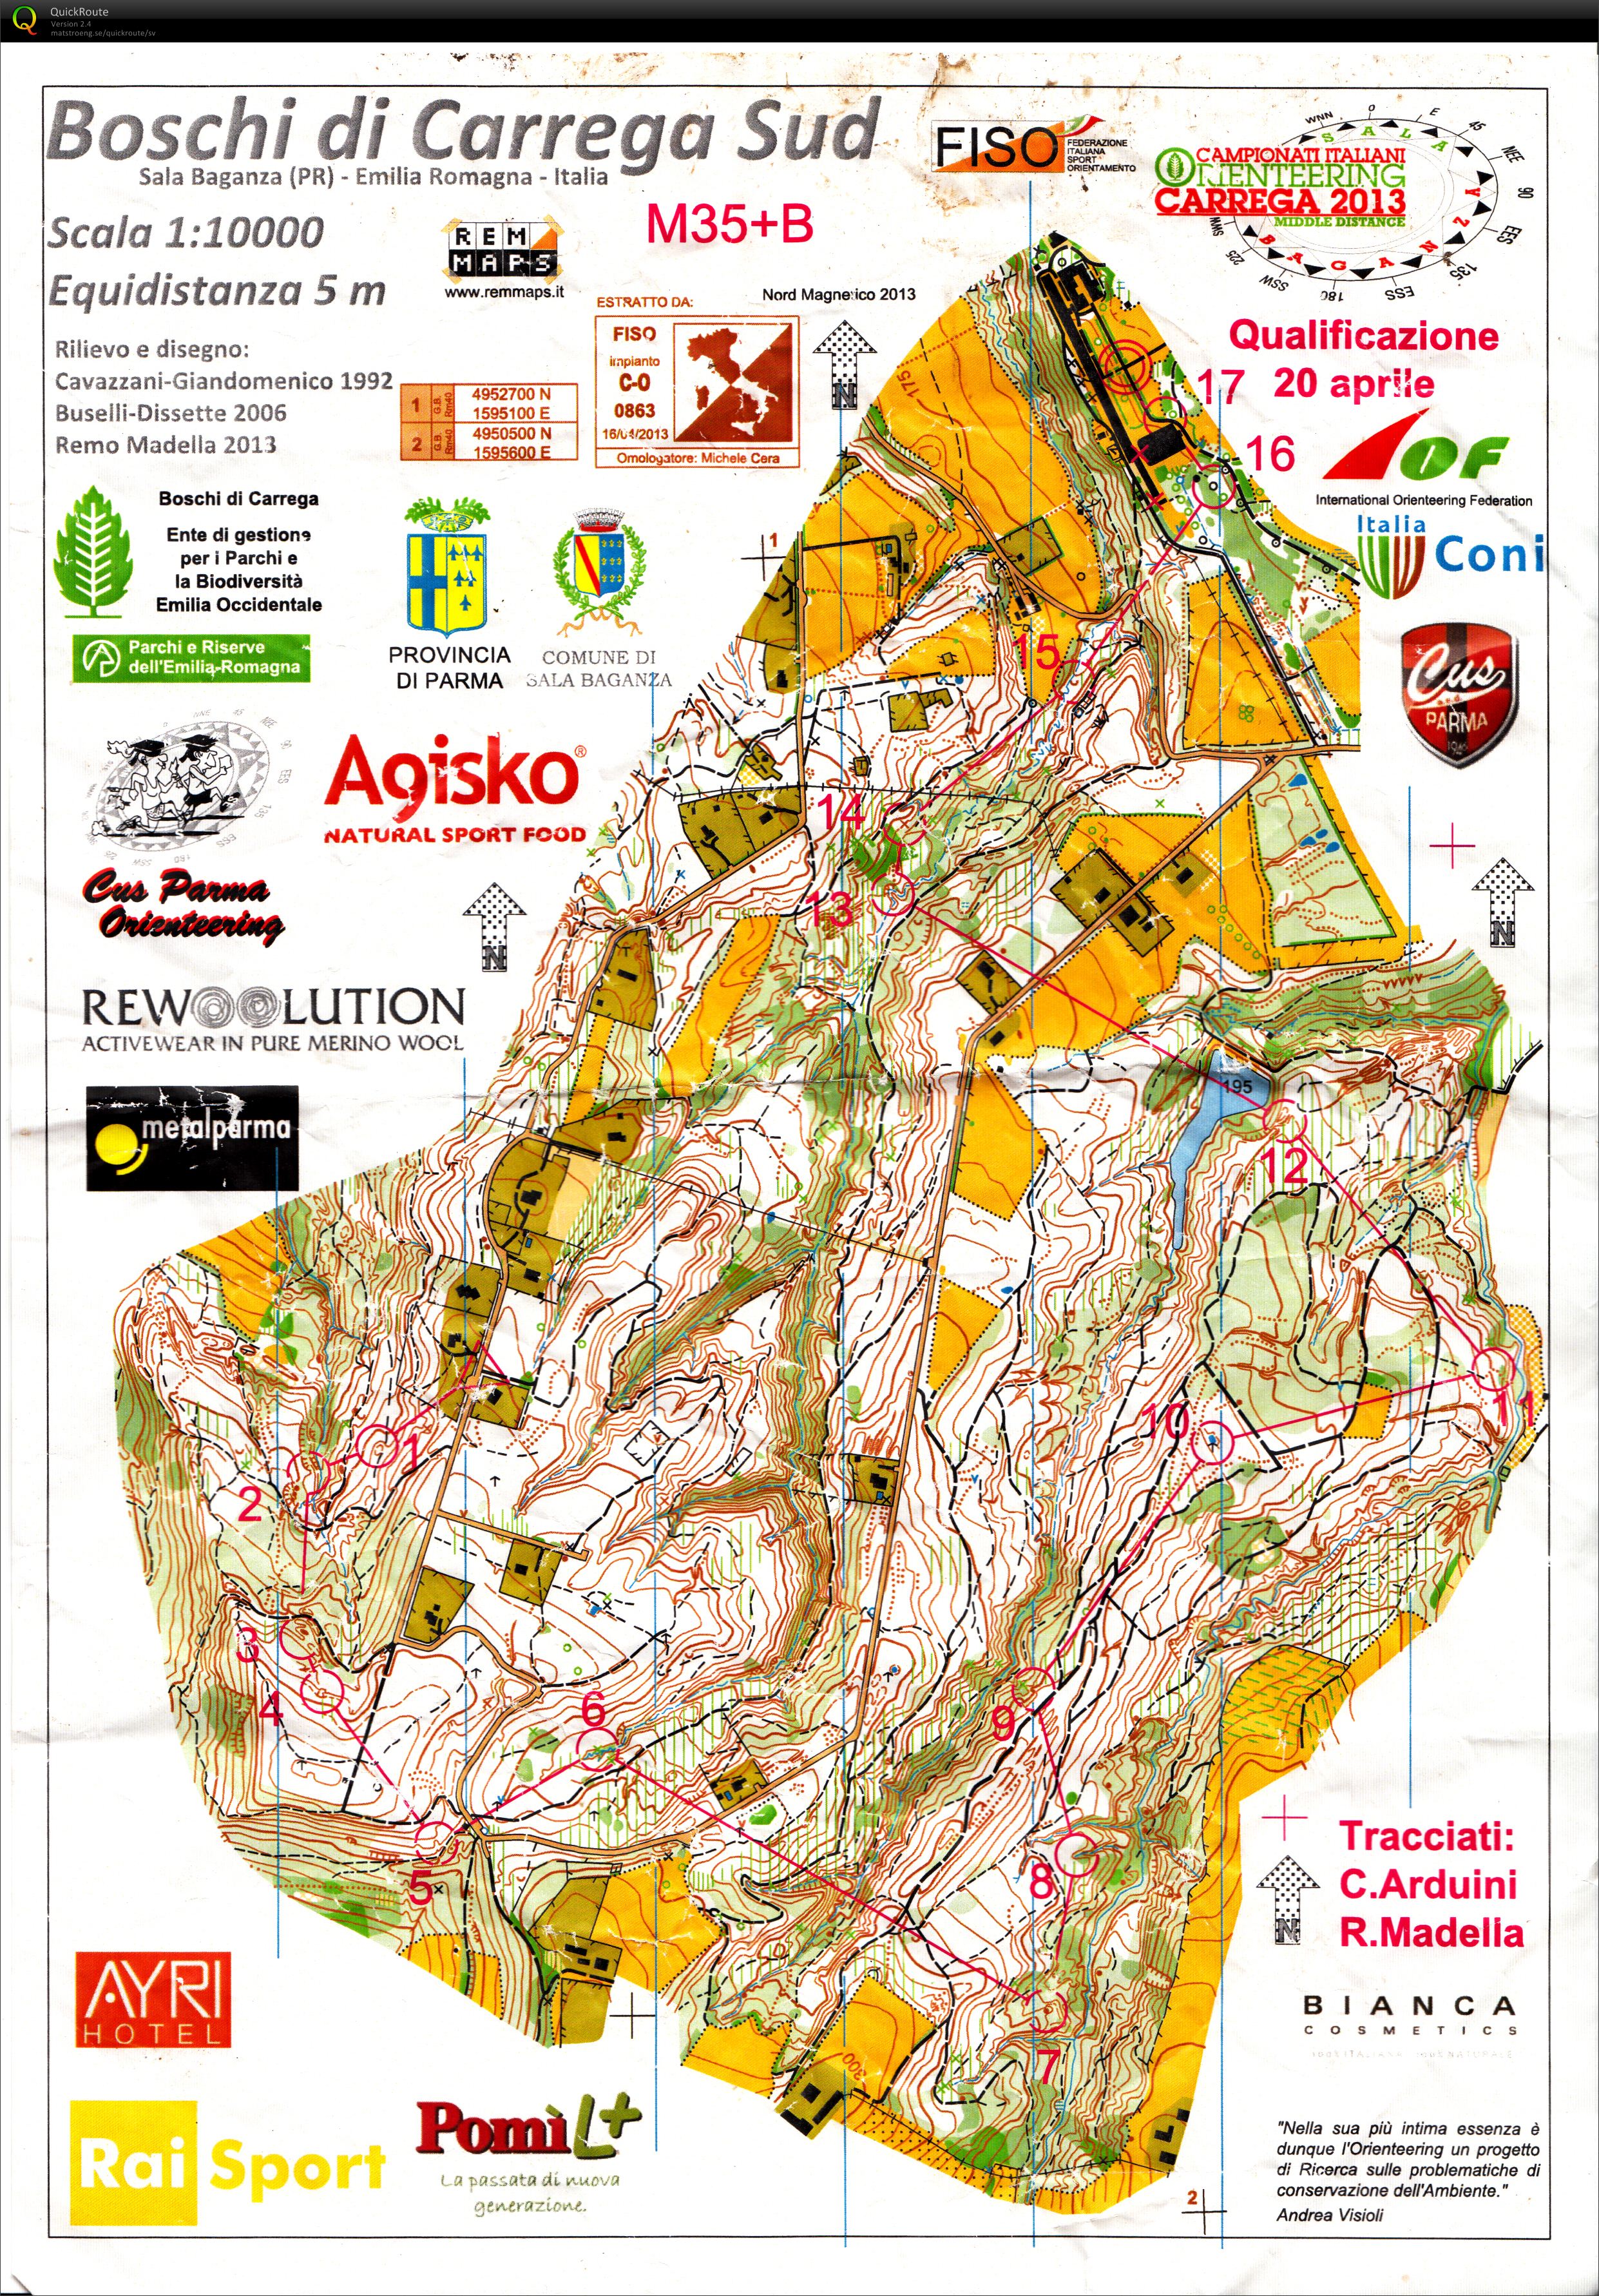 Italian Championship Middle Distance Qualification (20/04/2013)